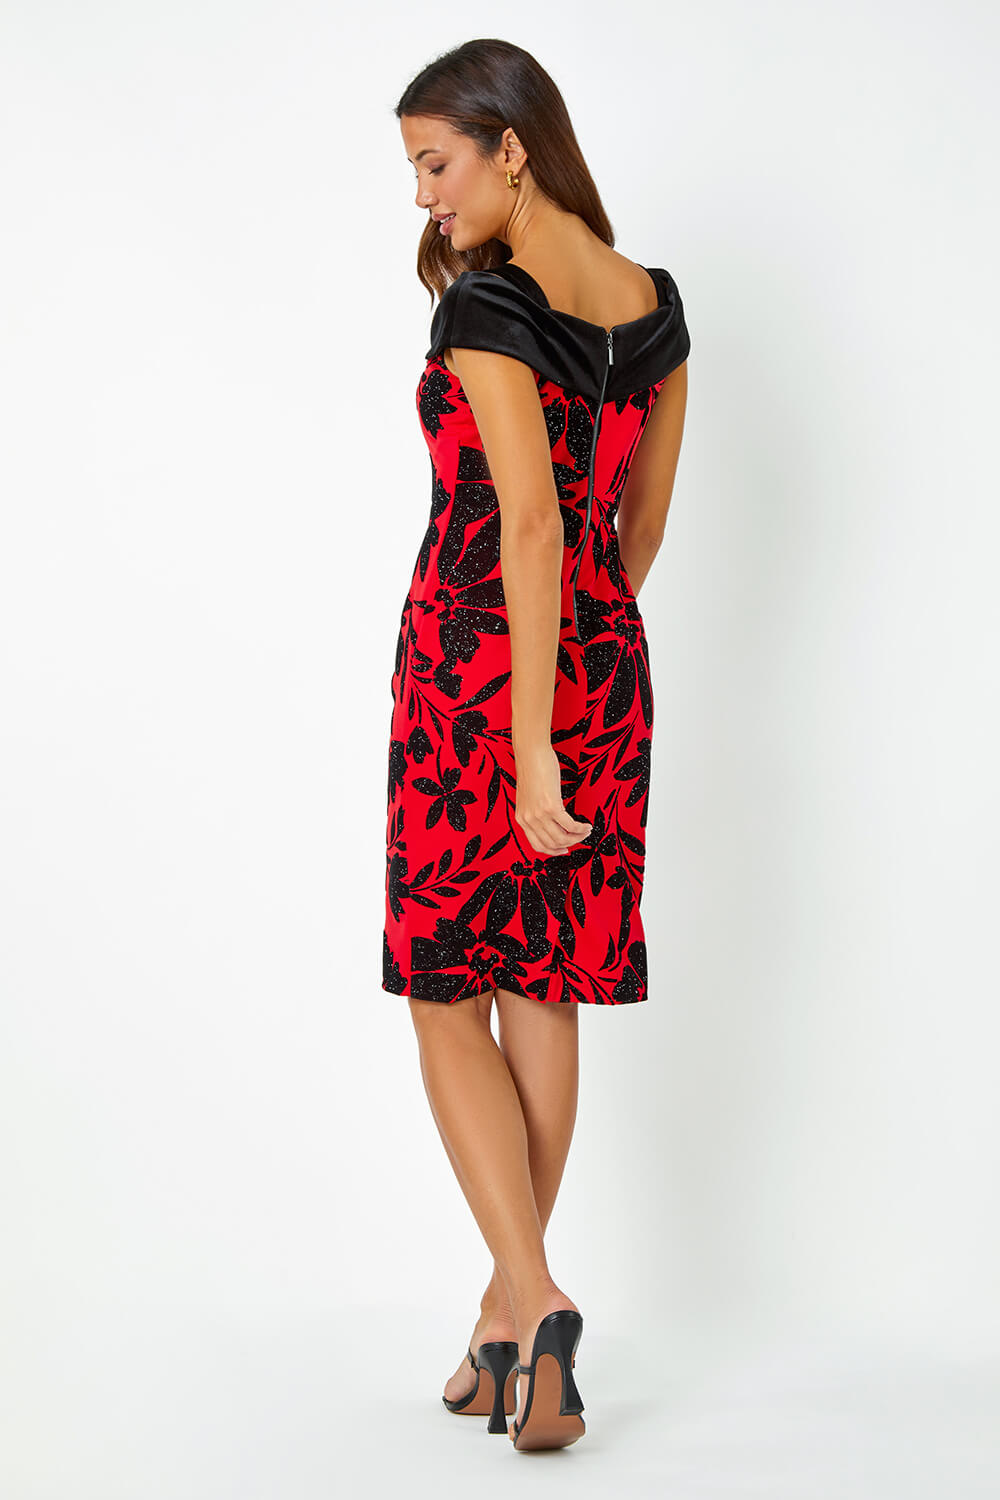 Red Flocked Floral Premium Stretch Dress, Image 3 of 5